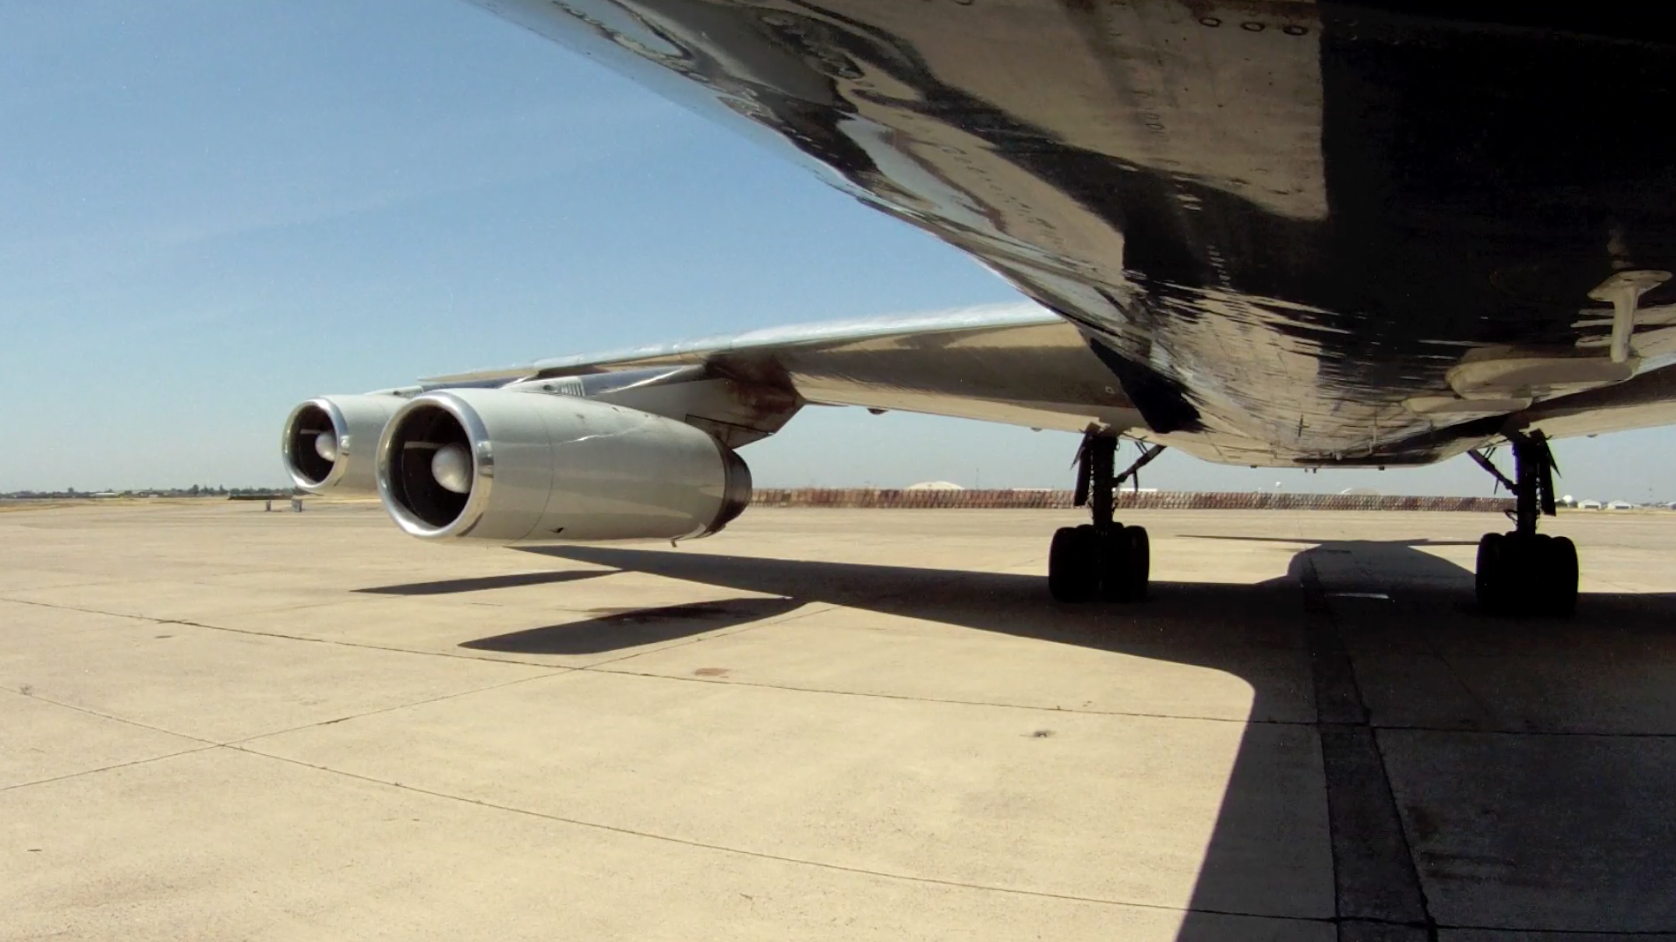 Wing view during JT3 engine start of ATI DC-8-62 N799AL for its final flight within the Continental United States at McClellan Airport on May 12, 2013. This is a screenshot from the 9 episode mini series "DC-8 Farewell" that streams on the JetFlix TV streaming service for aviation super fans.